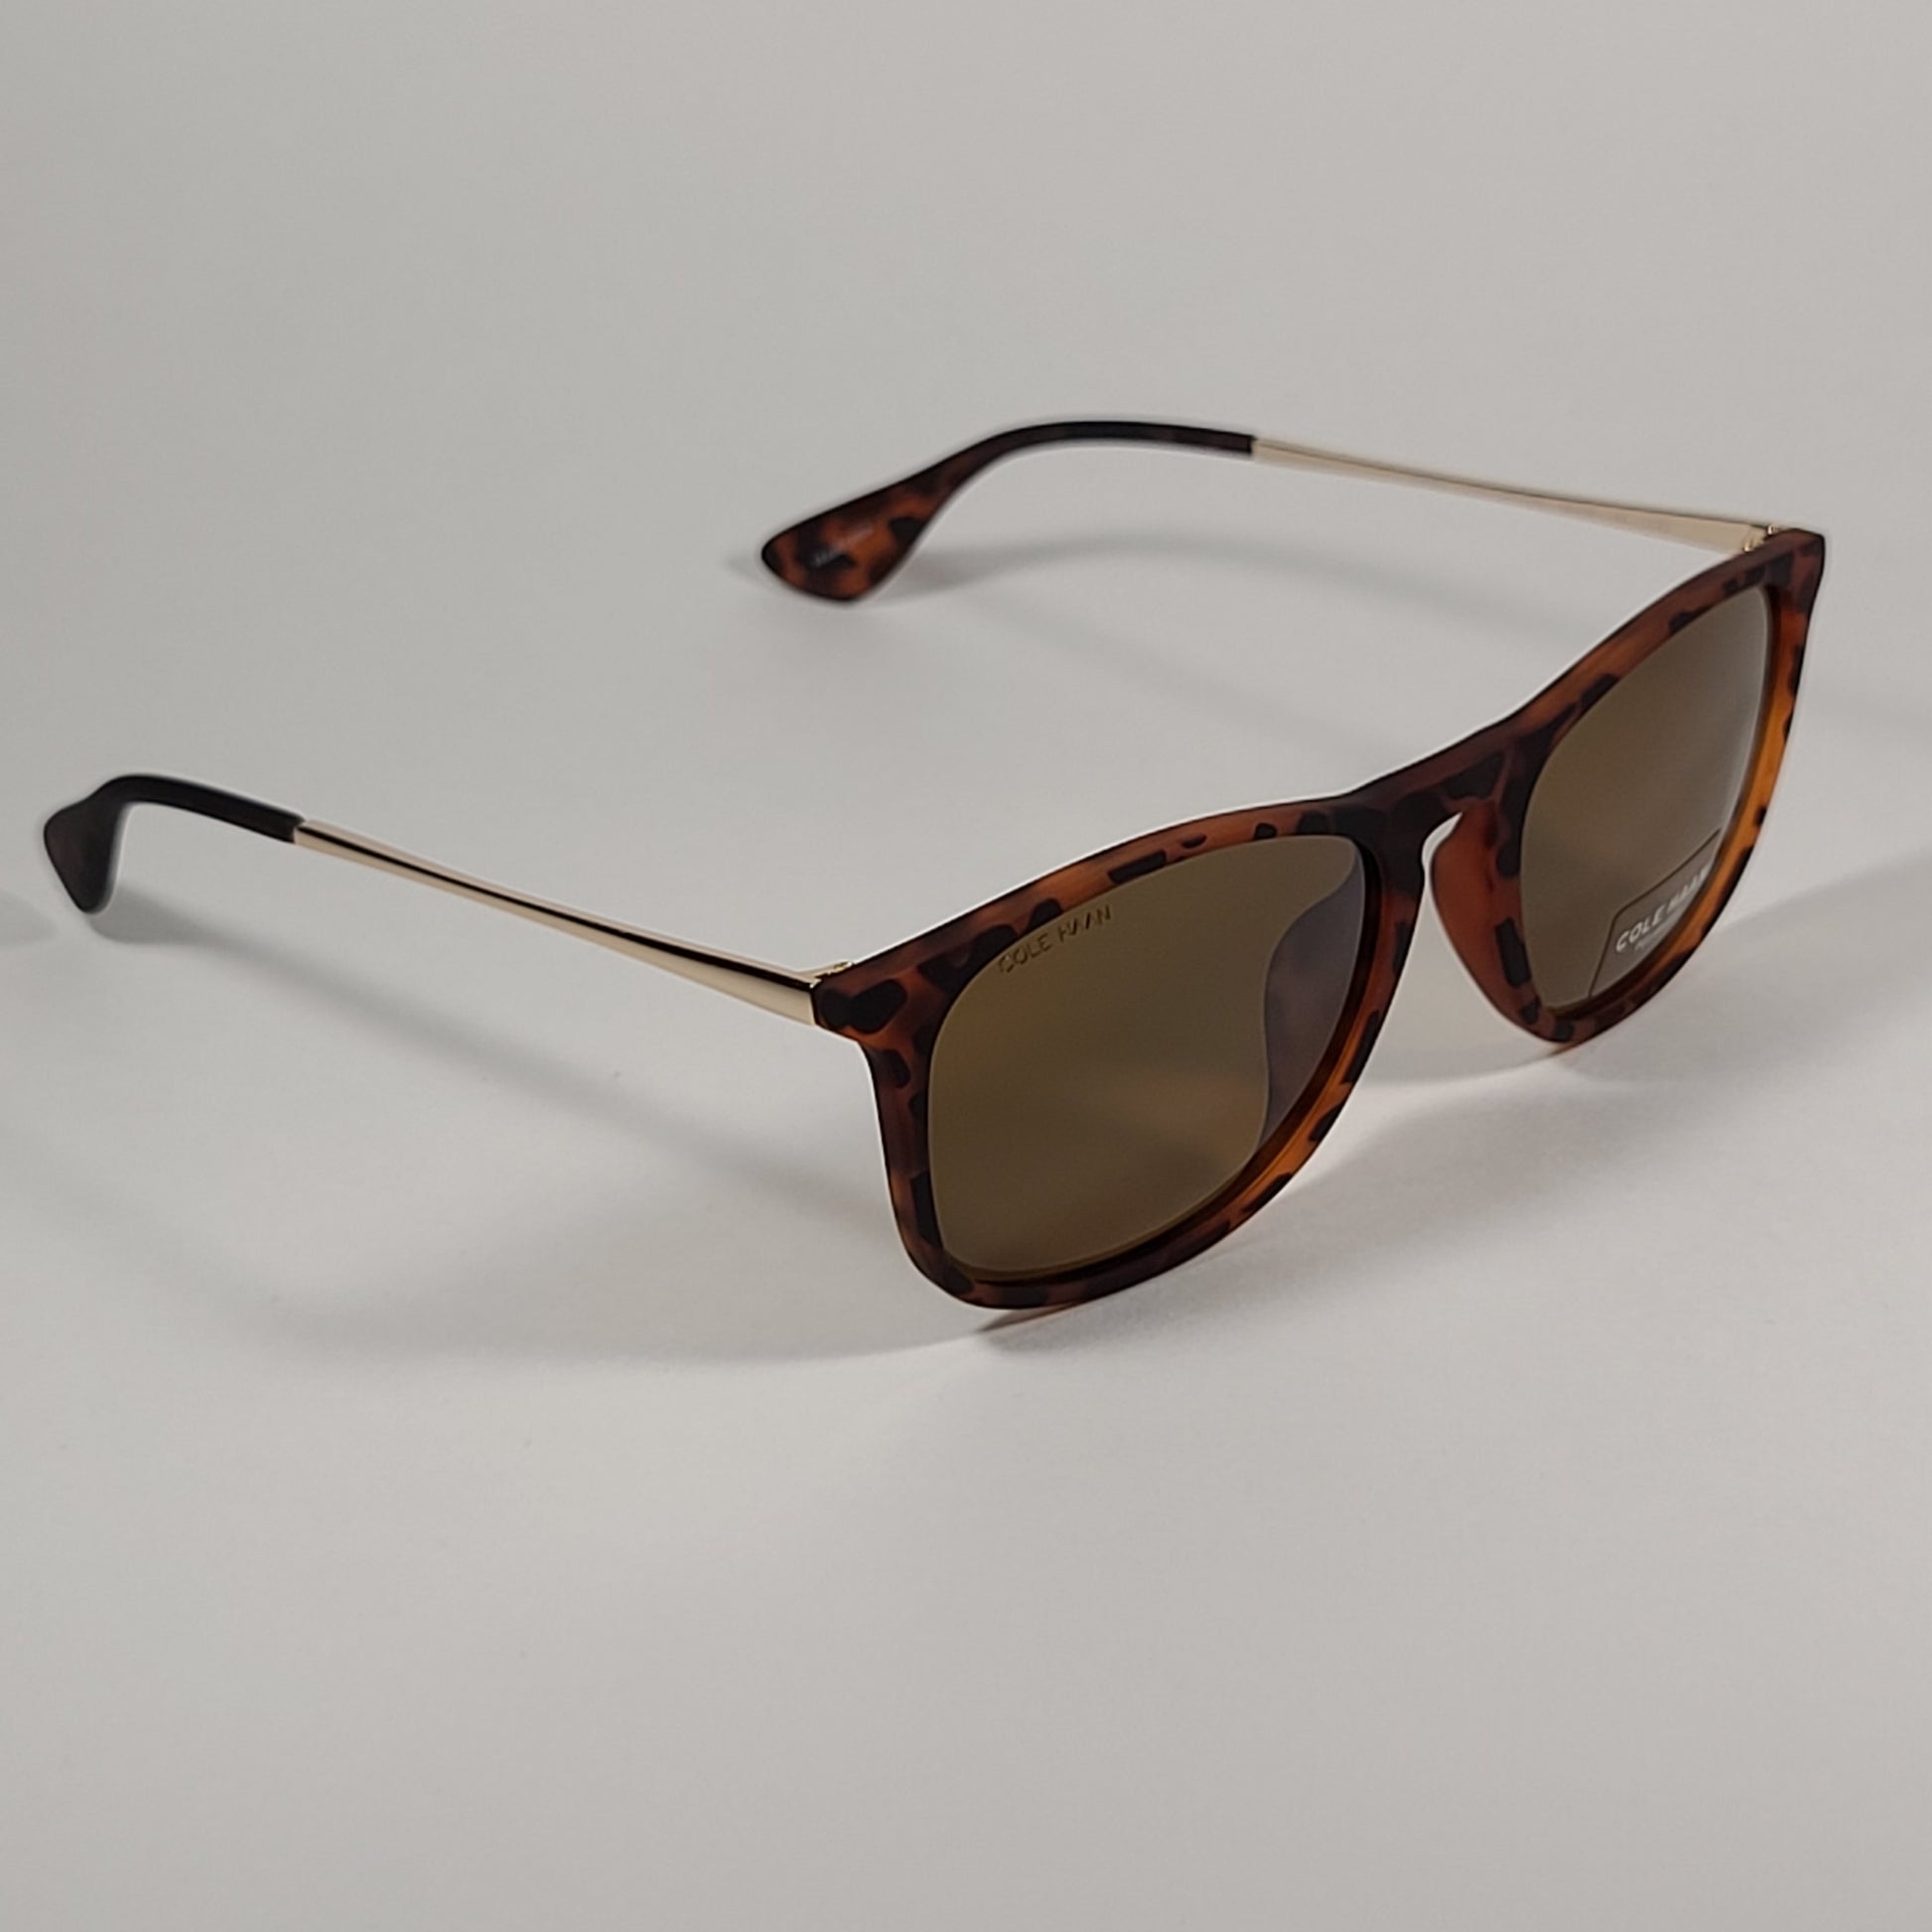 Cole Haan CH8507 215 Polarized Key Hole Sunglasses Matte Tortoise And Gold Frame Brown Lens - Sunglasses